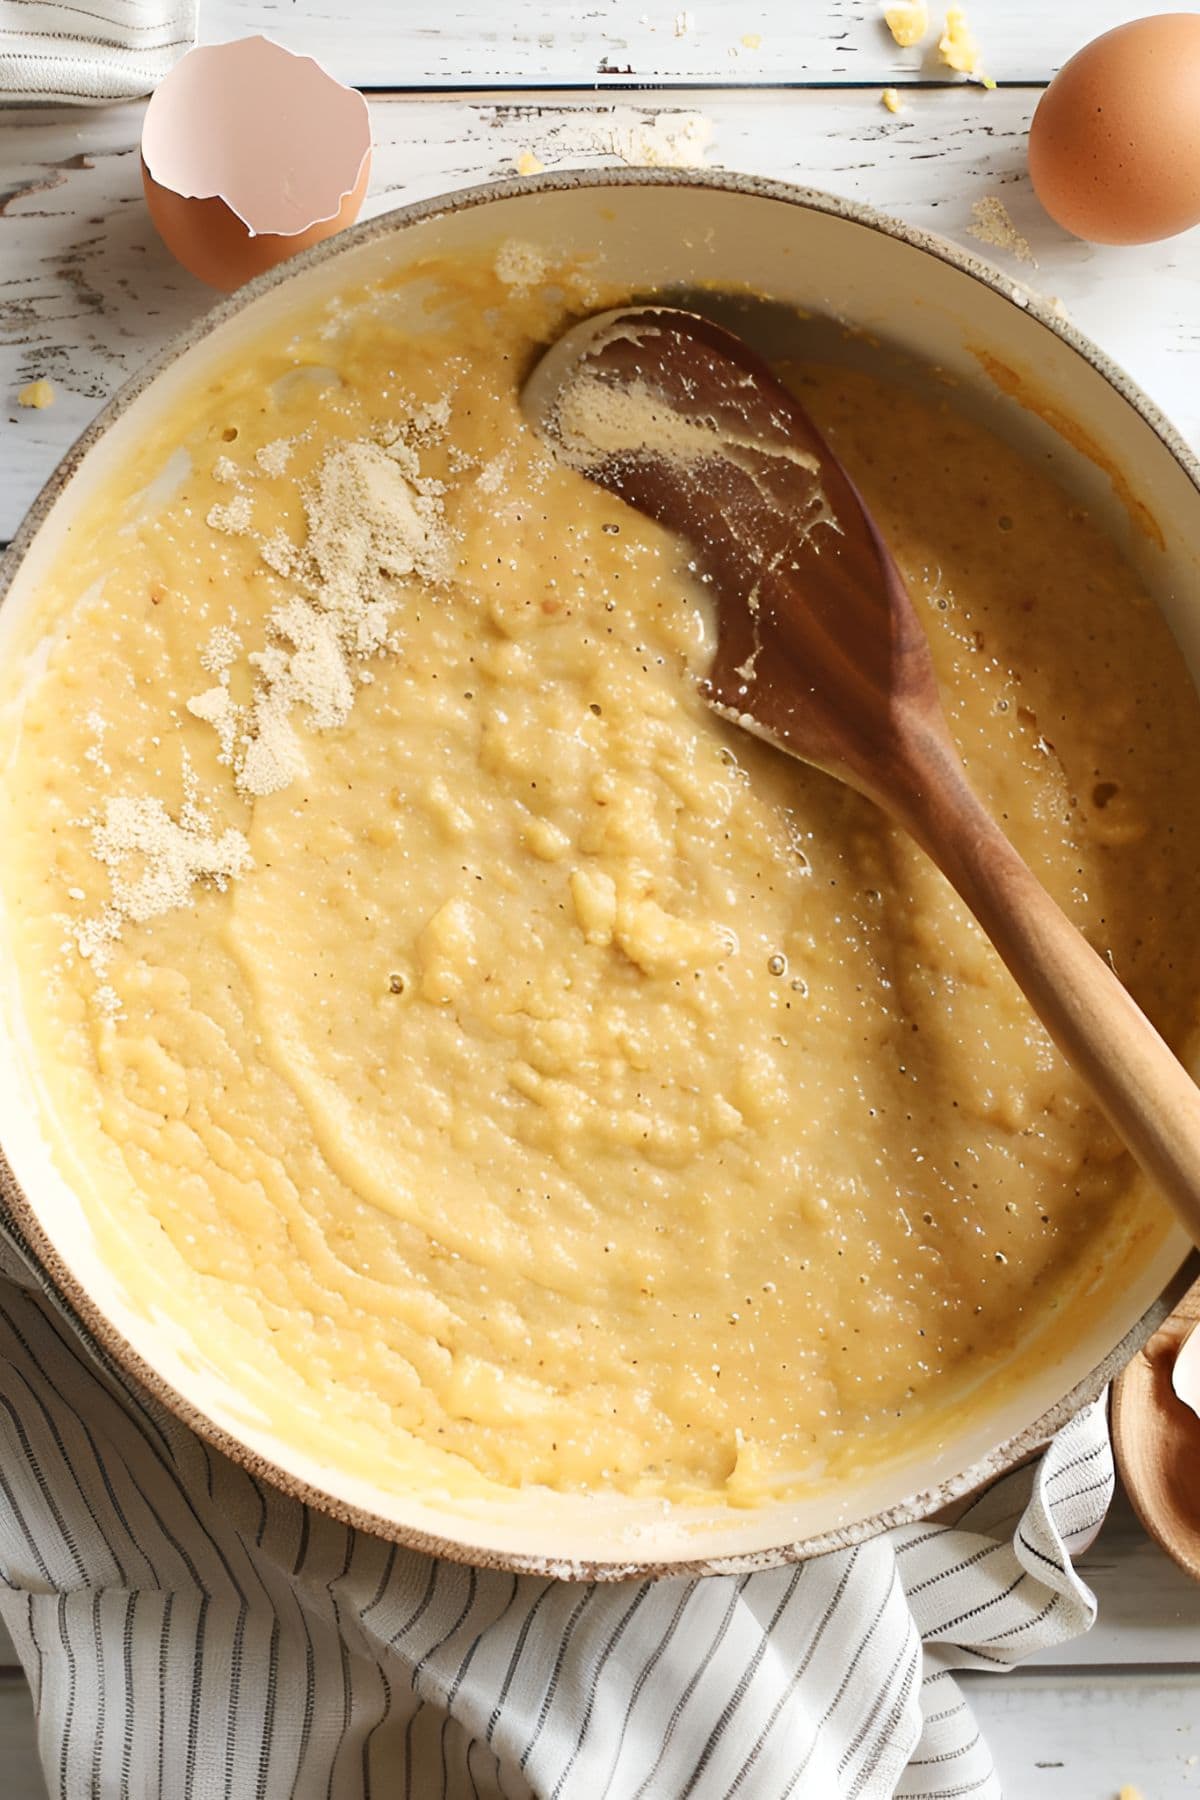 Top View of Marie Callender's Cornbread Batter in a Bowl with a Wooden Spoon